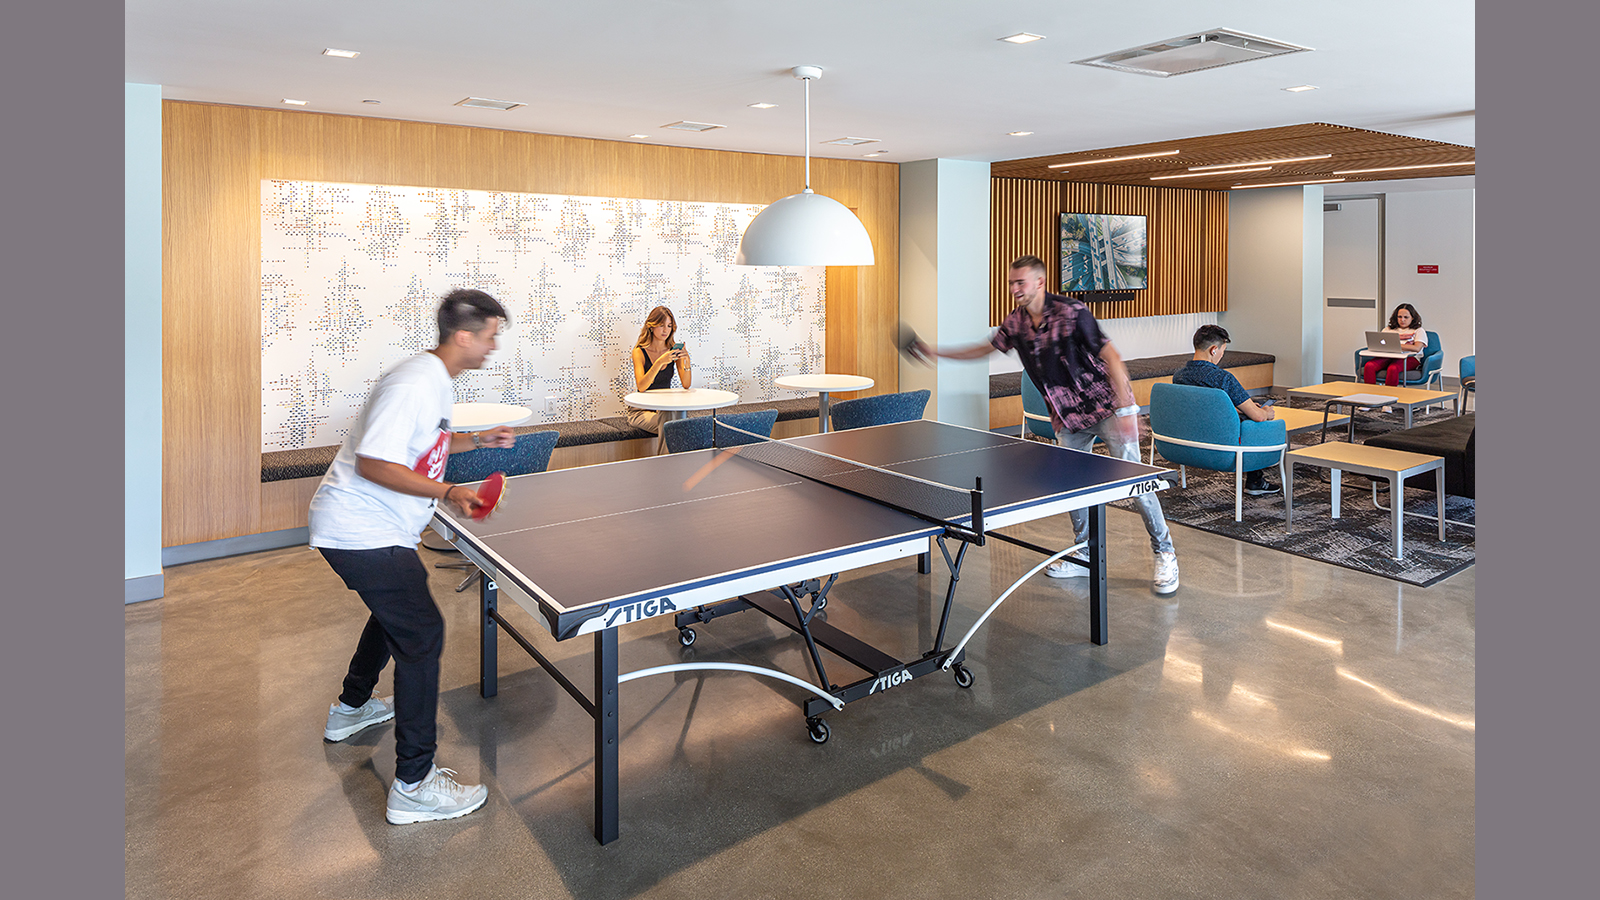 Loyola Marymount University Student Housing in Los Angeles, students play ping pong